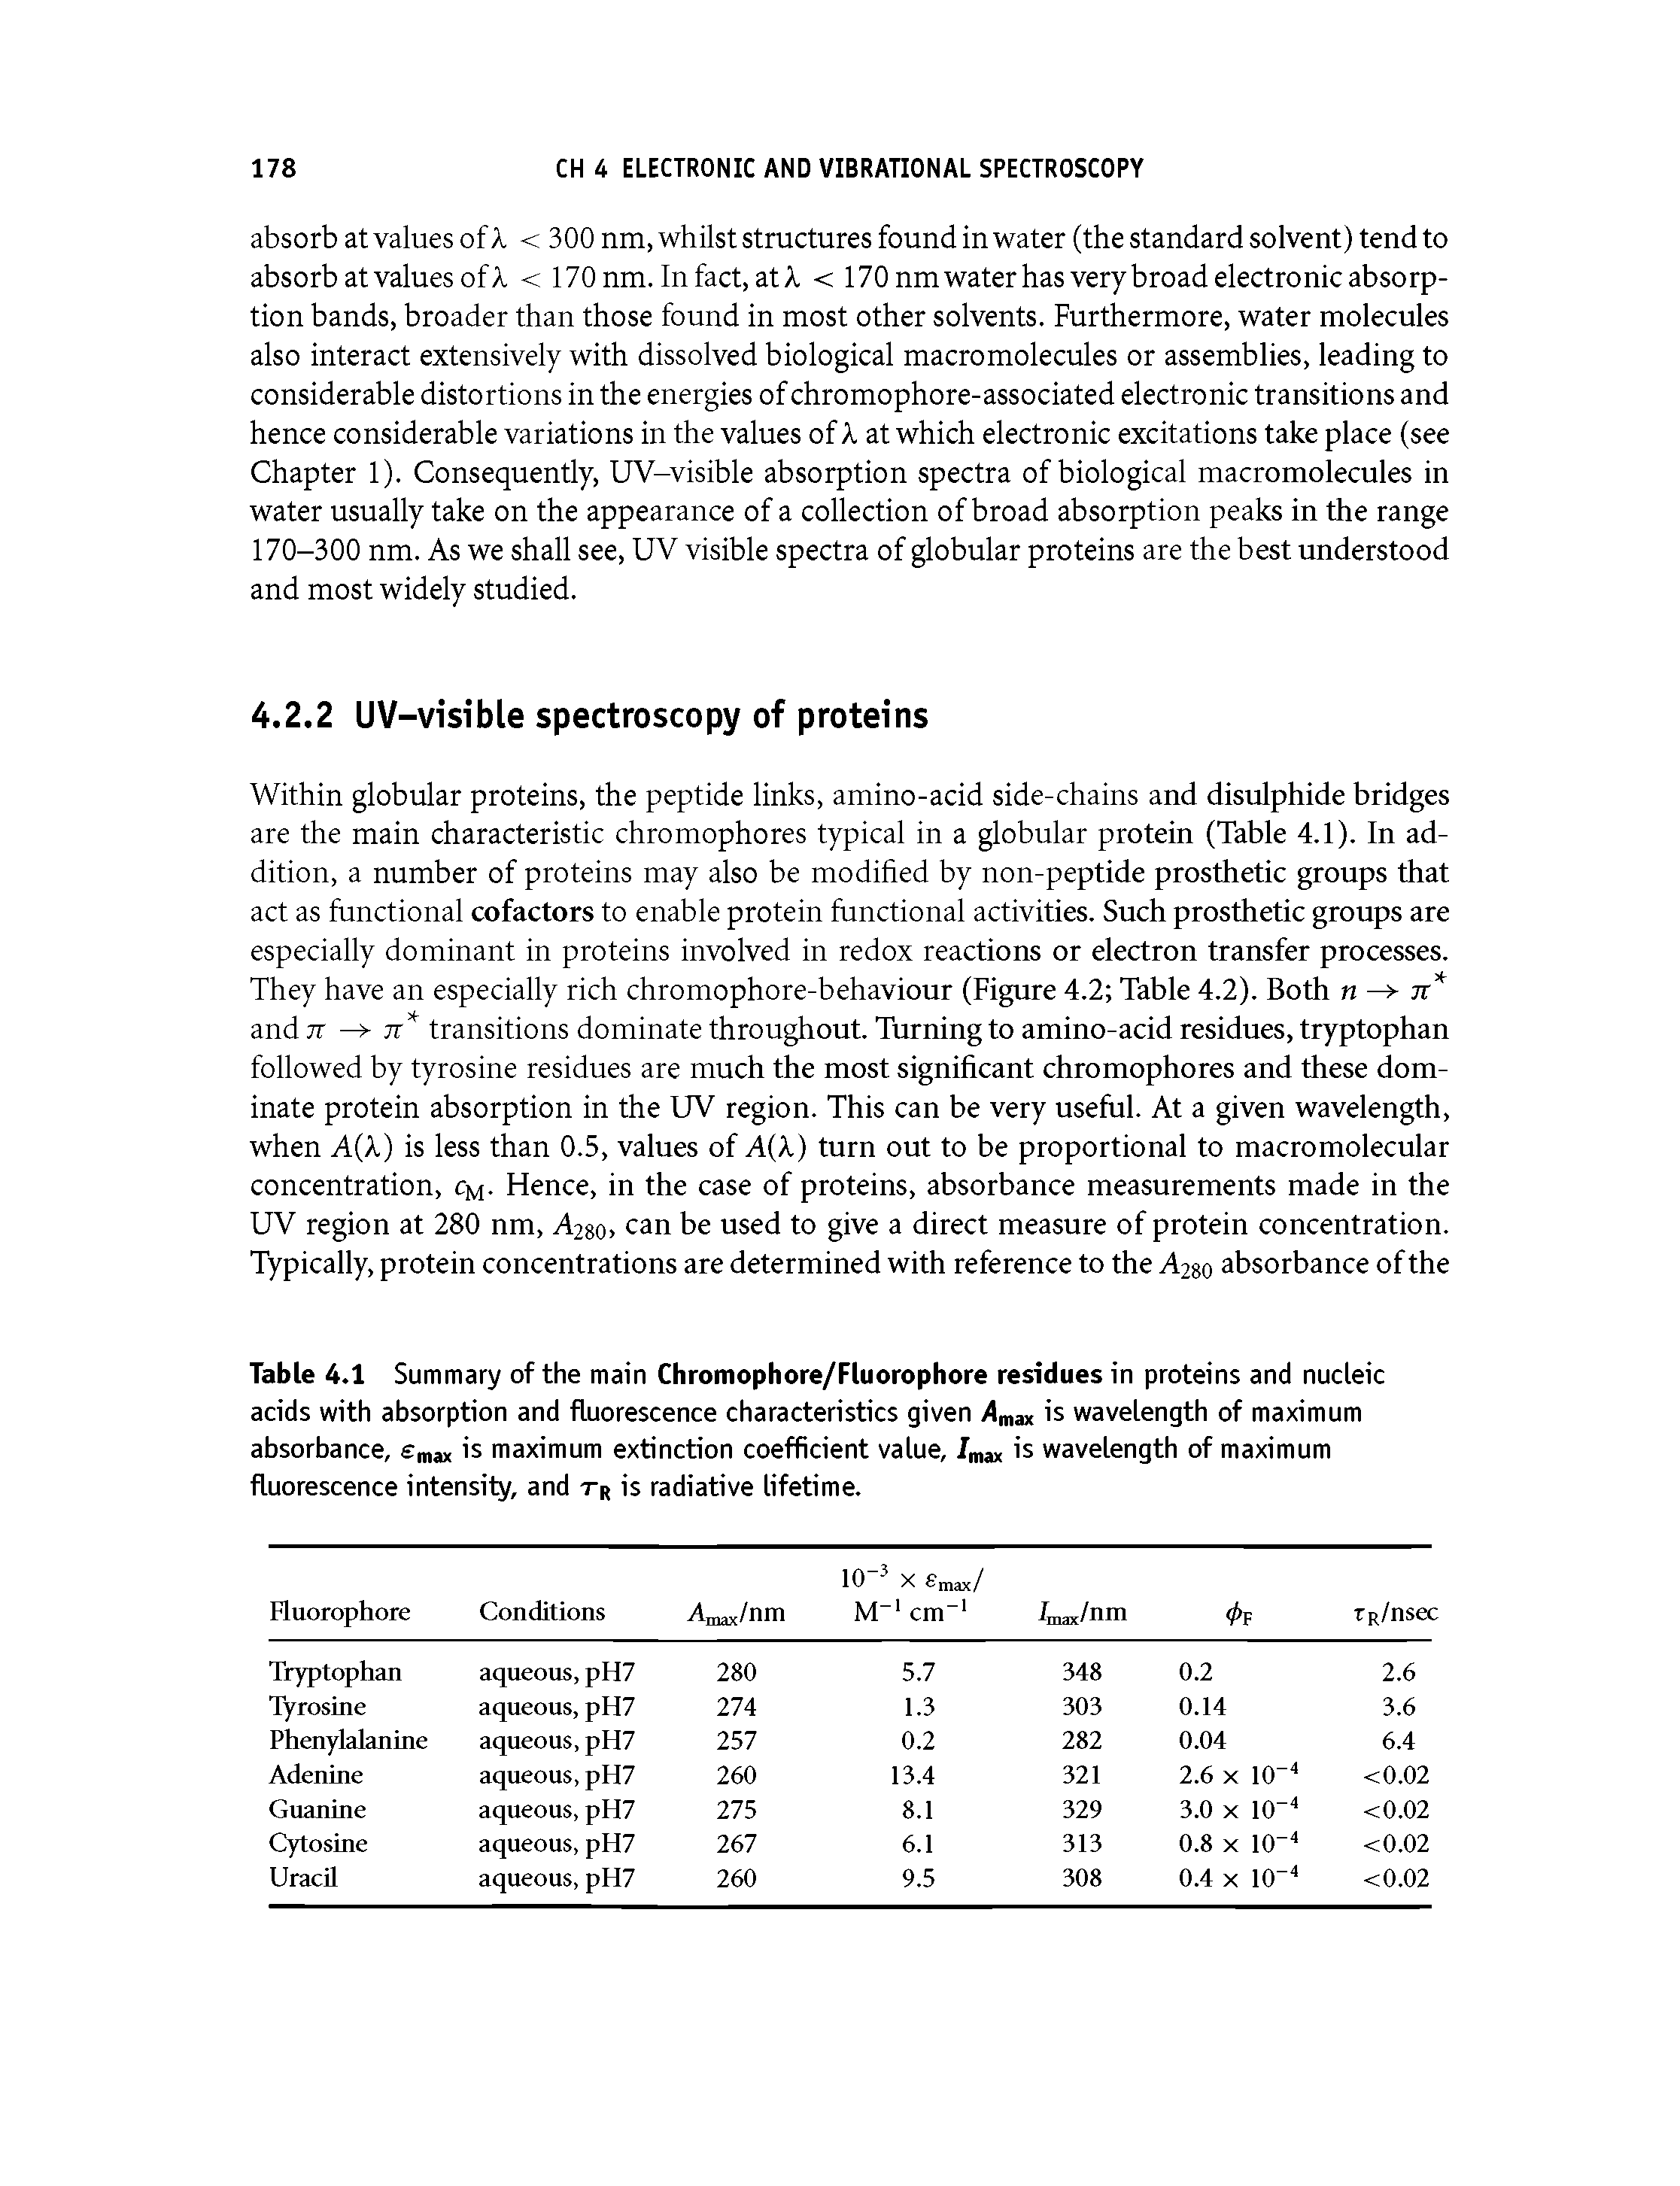 Table 4.1 Summary of the main Chromophore/Fluorophore residues in proteins and nucleic acids with absorption and fluorescence characteristics given Amax is wavelength of maximum absorbance, m is maximum extinction coefficient value, is wavelength of maximum fluorescence intensity, and tr is radiative lifetime.